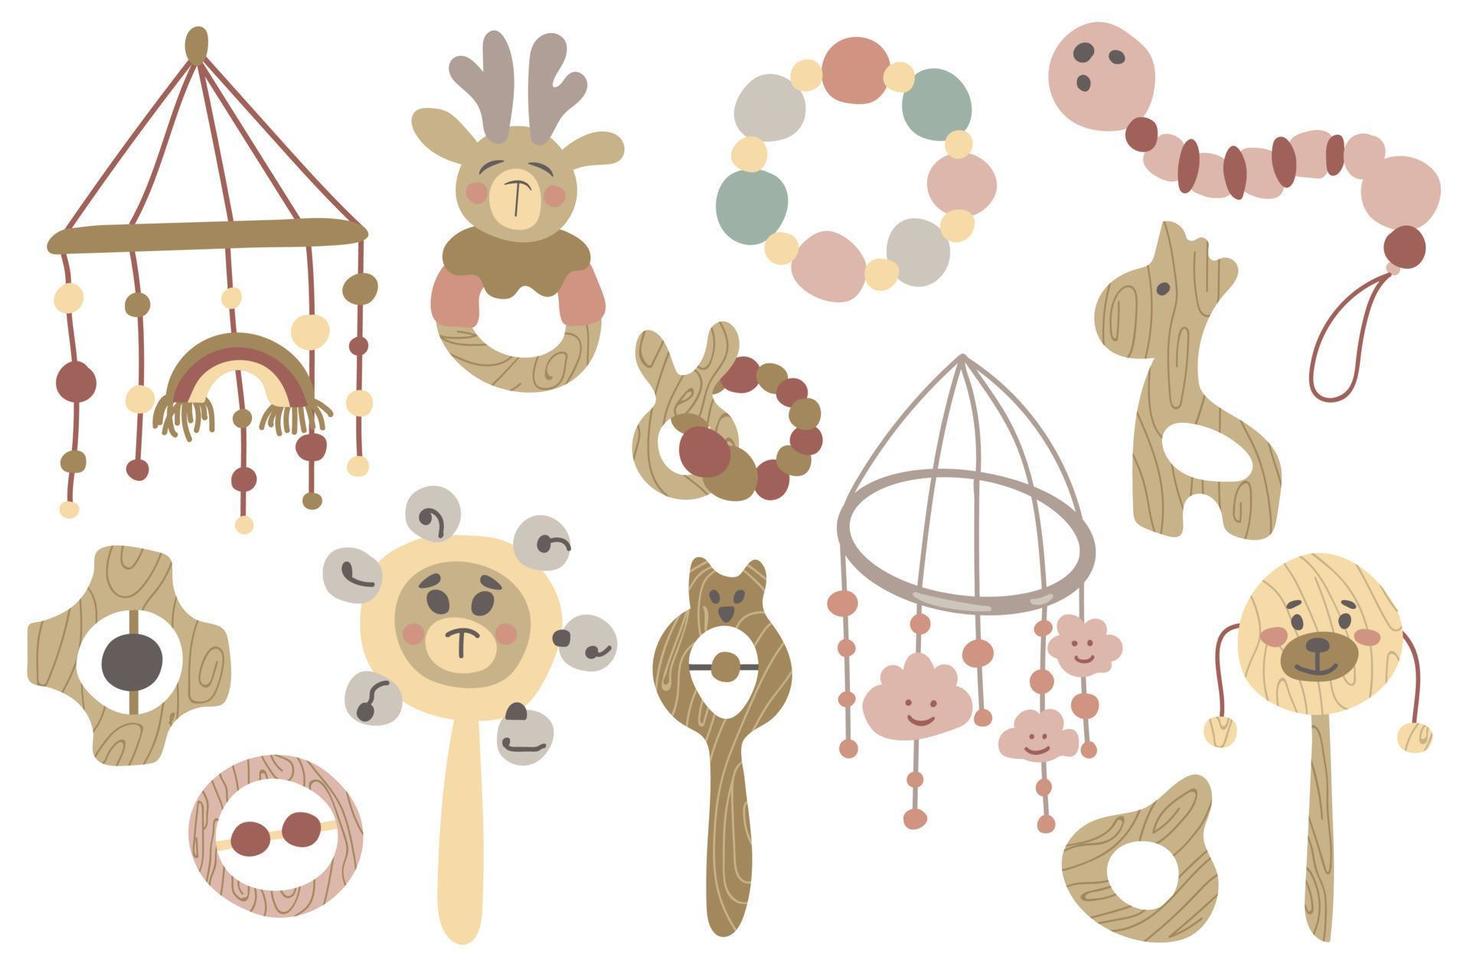 Cute drawn set of children's natural toys. White background, isolate. Vector illustration.